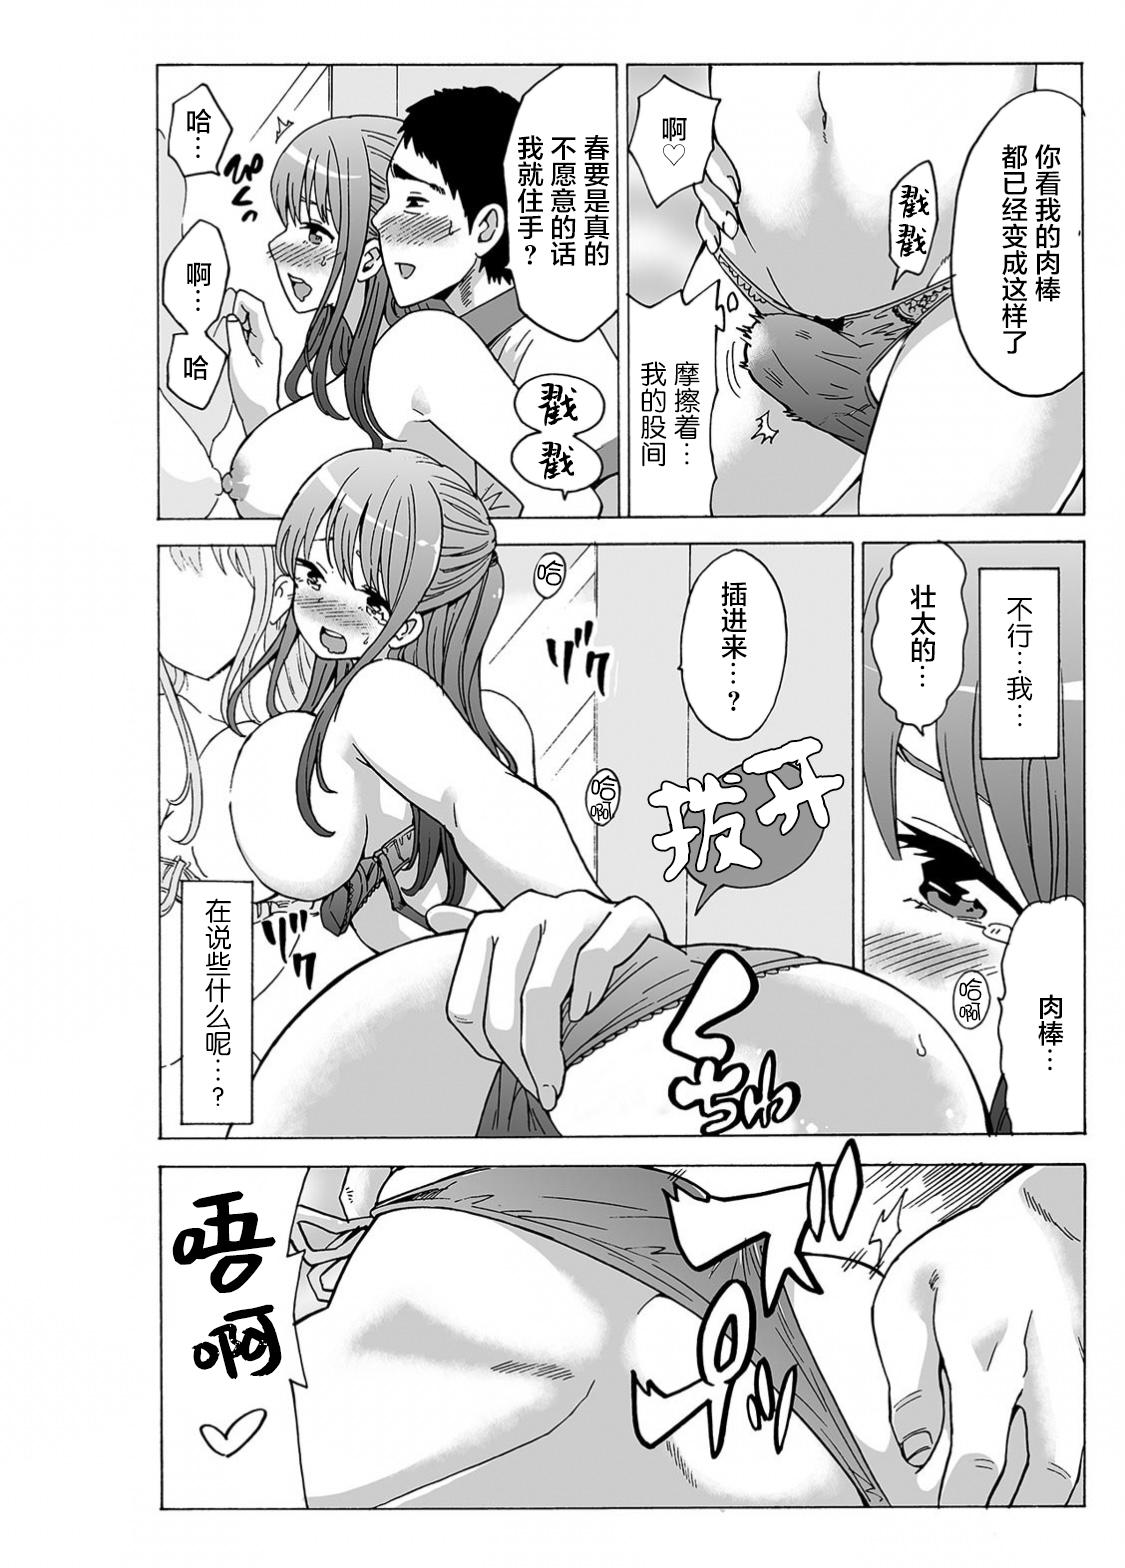 Verga [Motaro / Akahige] My first partner is ... my father-in-law!? 2 [Chinese] Cumming - Page 8